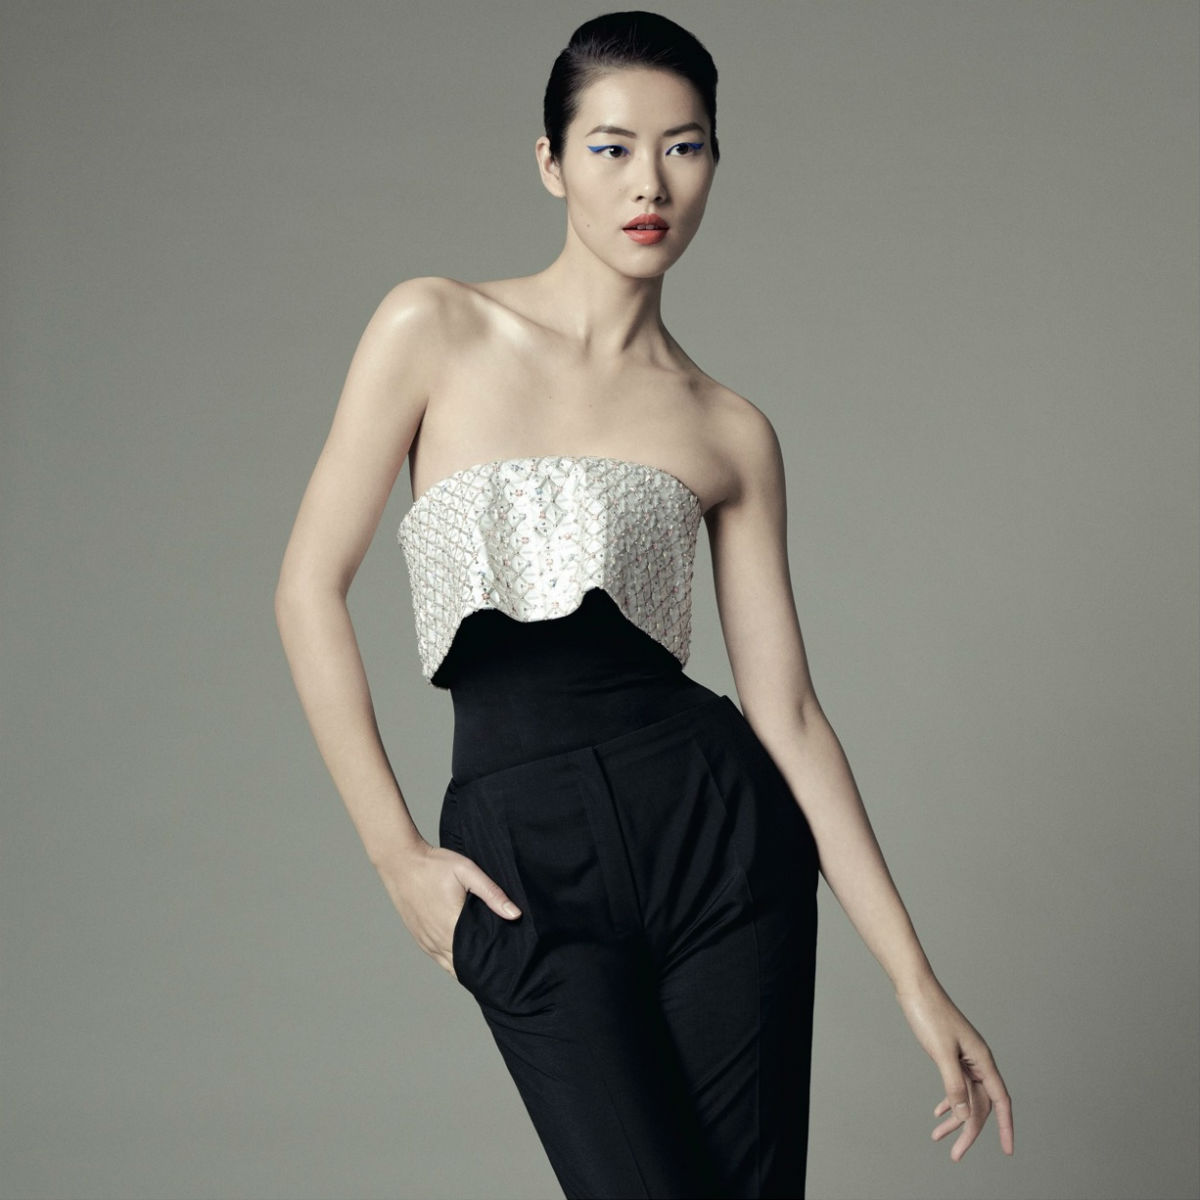 Chinese Models  Pictures Gallery Liu  Wen  World Model 